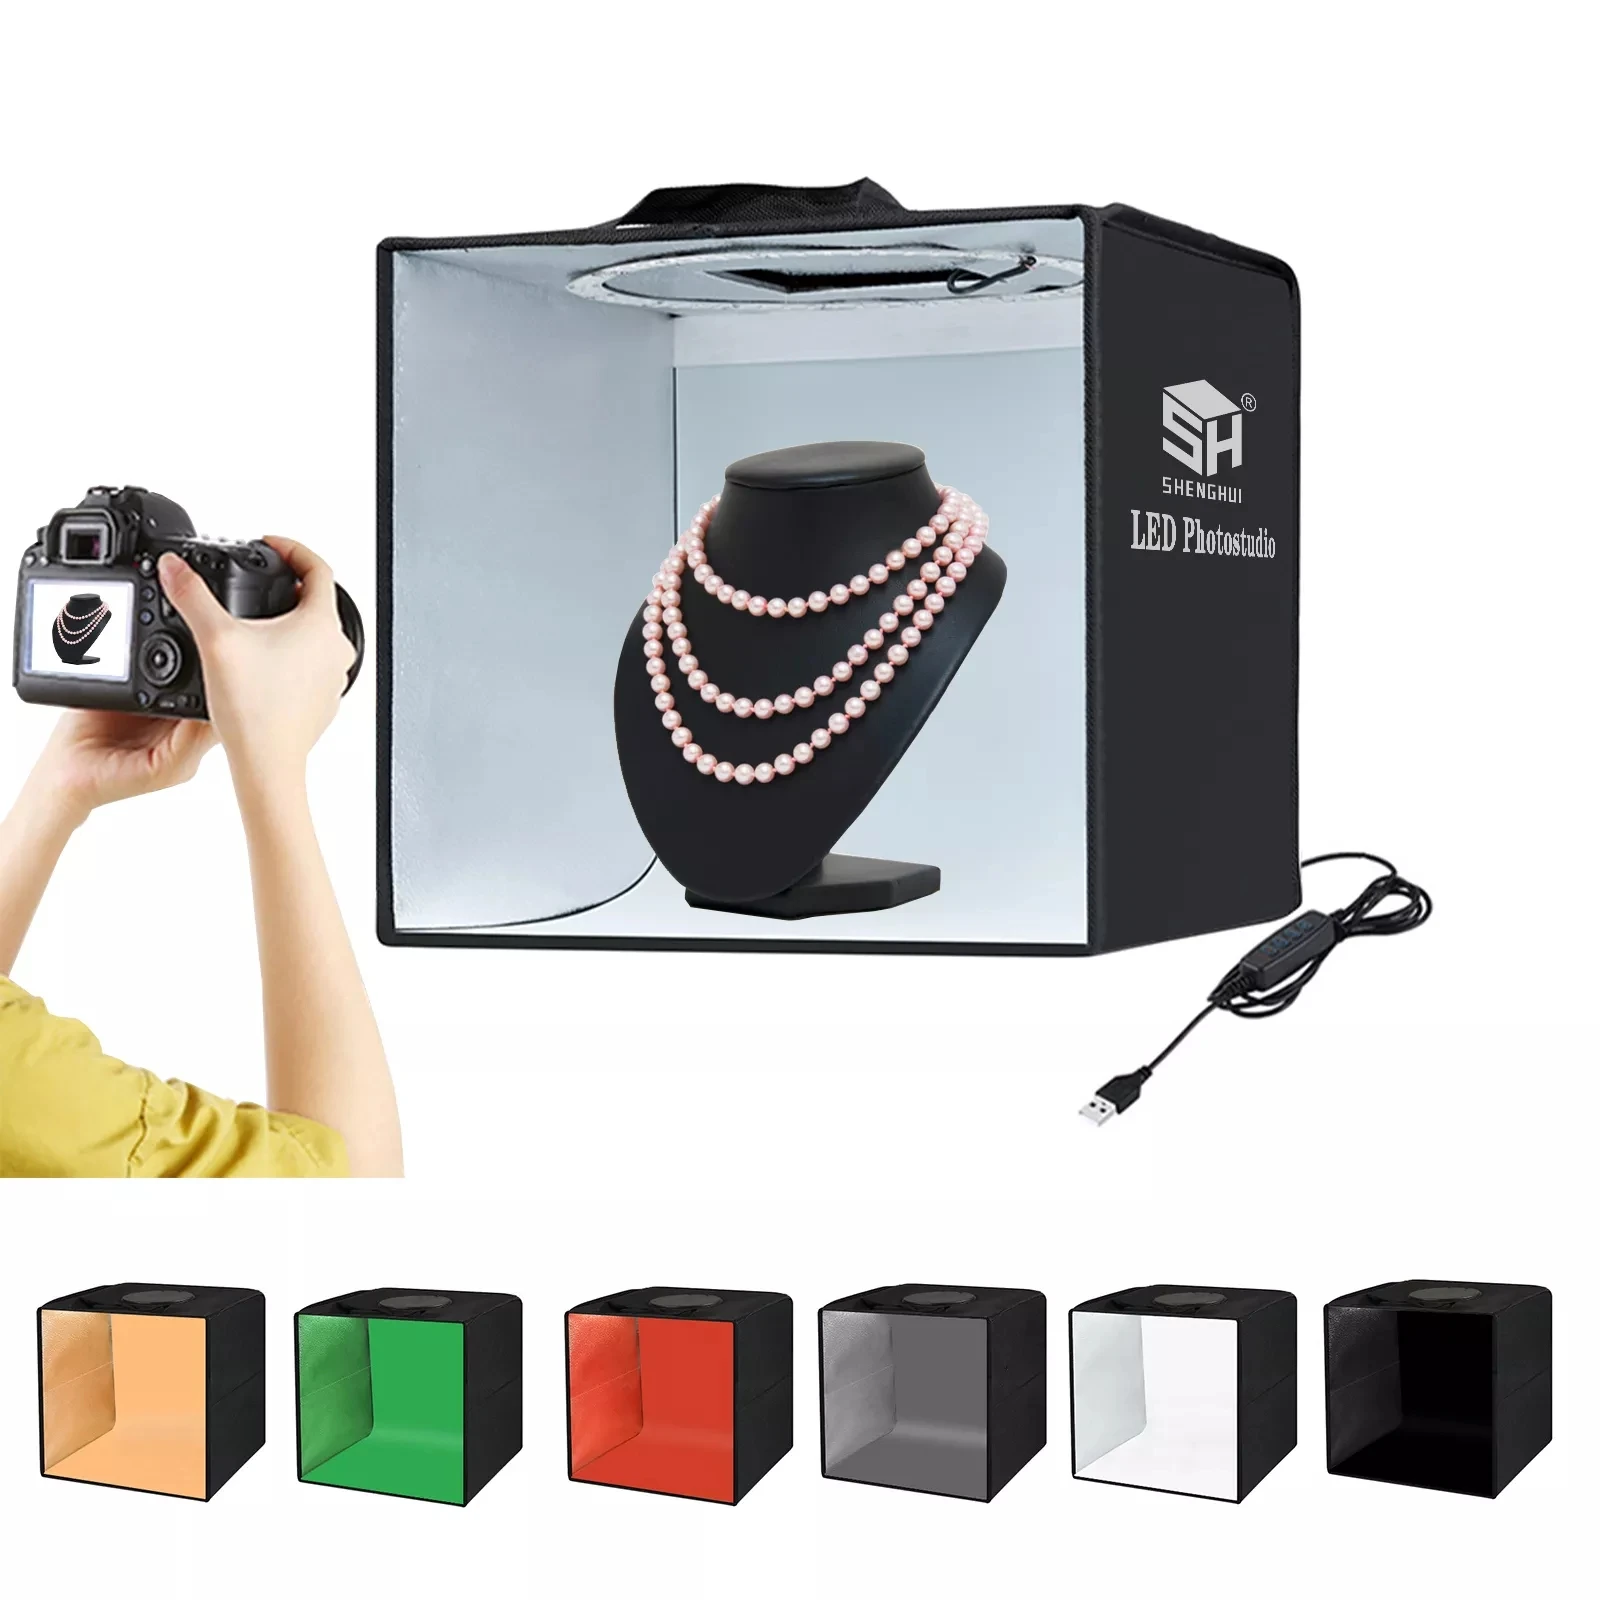 

30cm 40cm Tabletop Softbox Photography Lightbox with 6pc Color Backgrounds Photo Studio Light Box Soft Shooting Tent Box